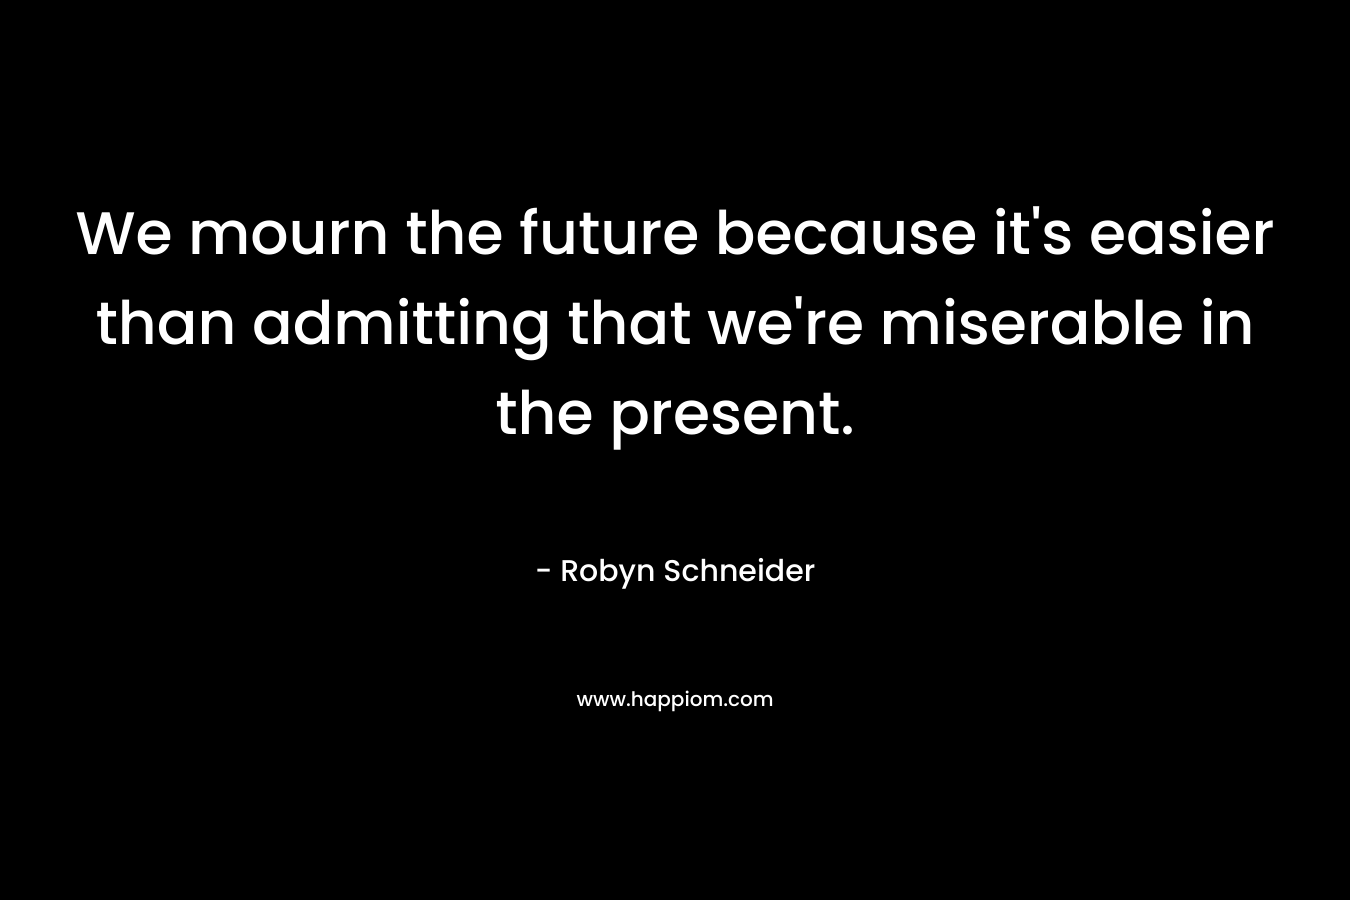 We mourn the future because it's easier than admitting that we're miserable in the present.